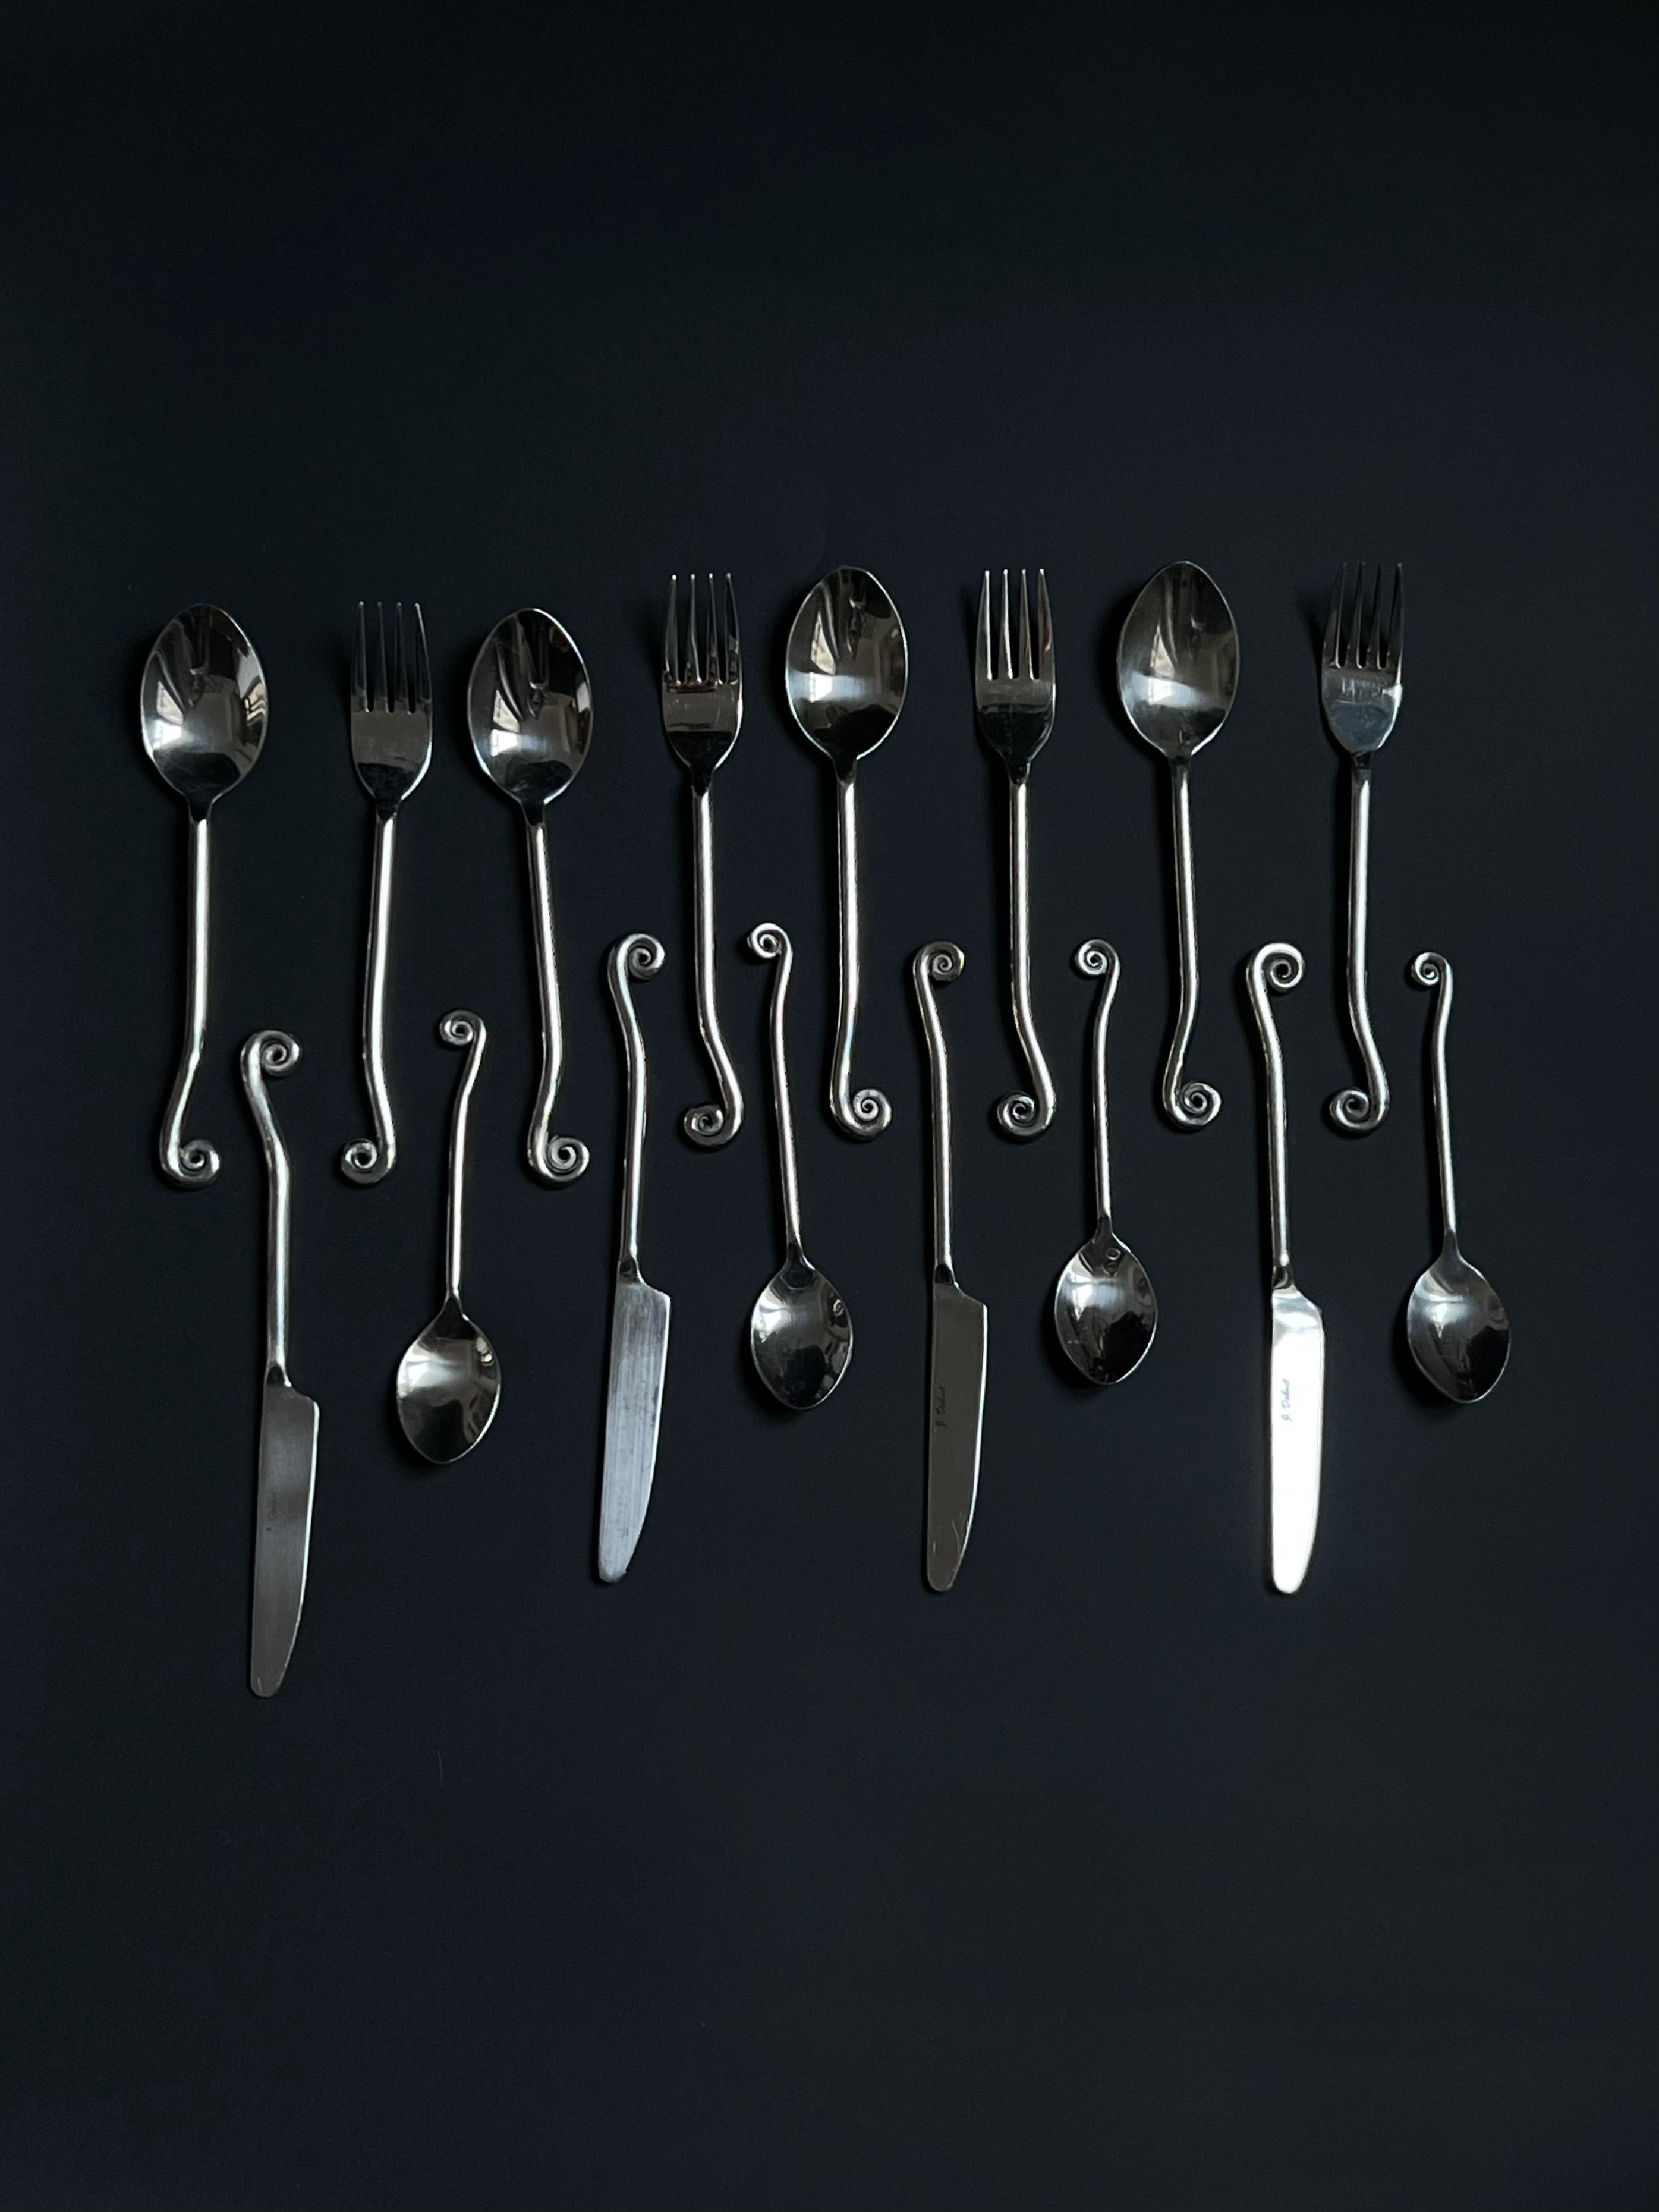 A set of Manushi Vintage Swirl Cutlery with ornate, twisted handles, including forks, knives, and spoons, arranged in a row on a dark background.